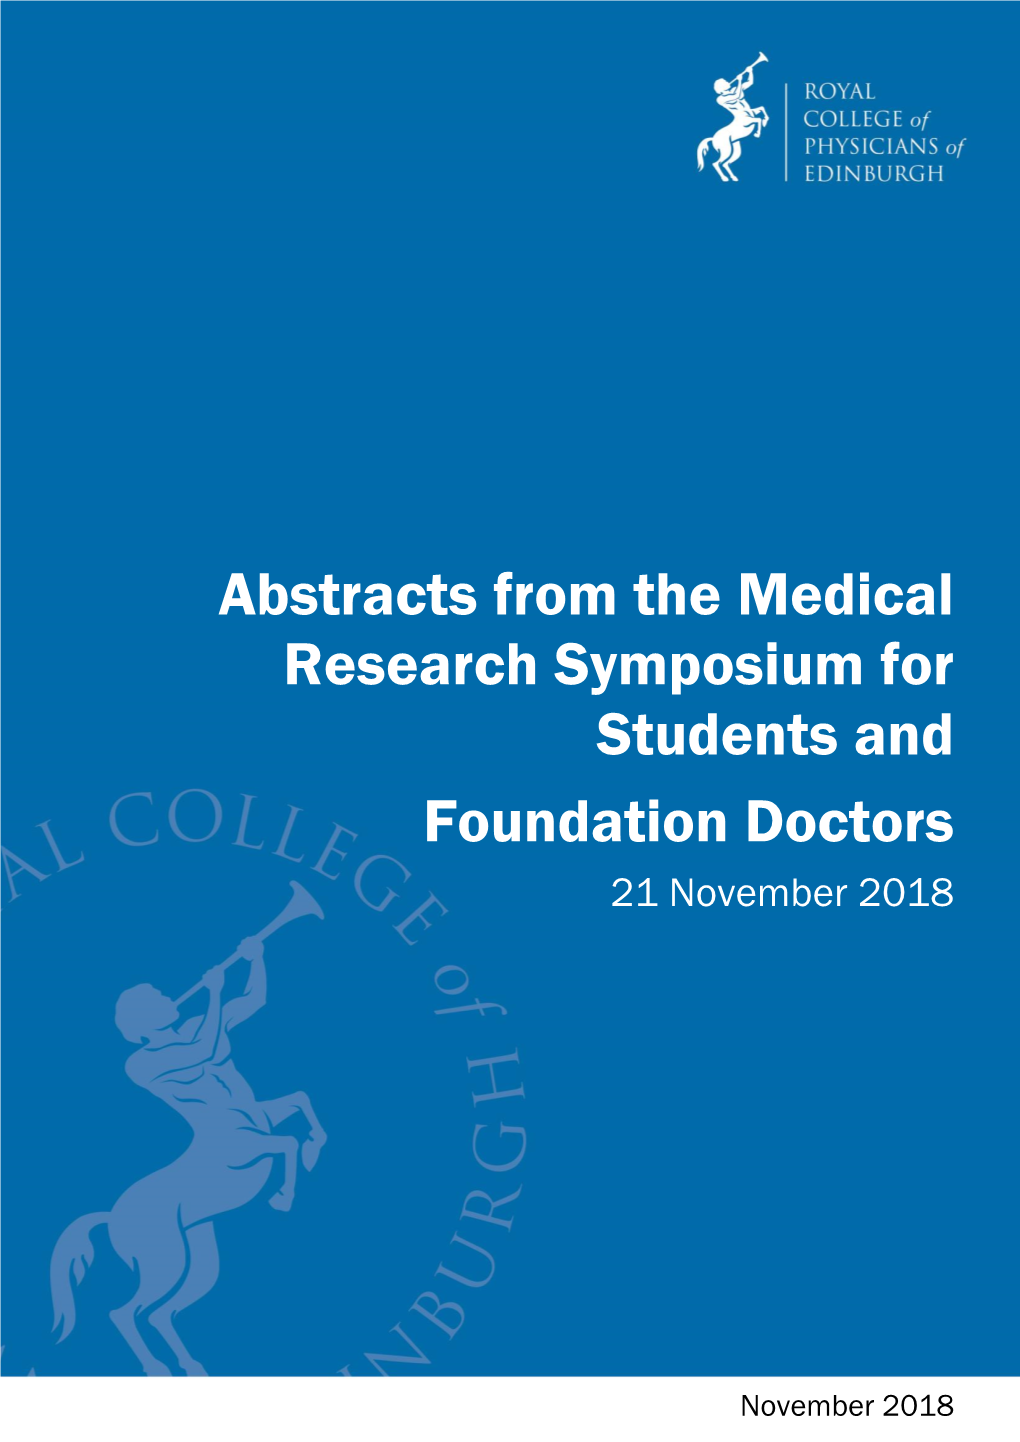 Abstracts from the Medical Research Symposium for Students and Foundation Doctors 21 November 2018